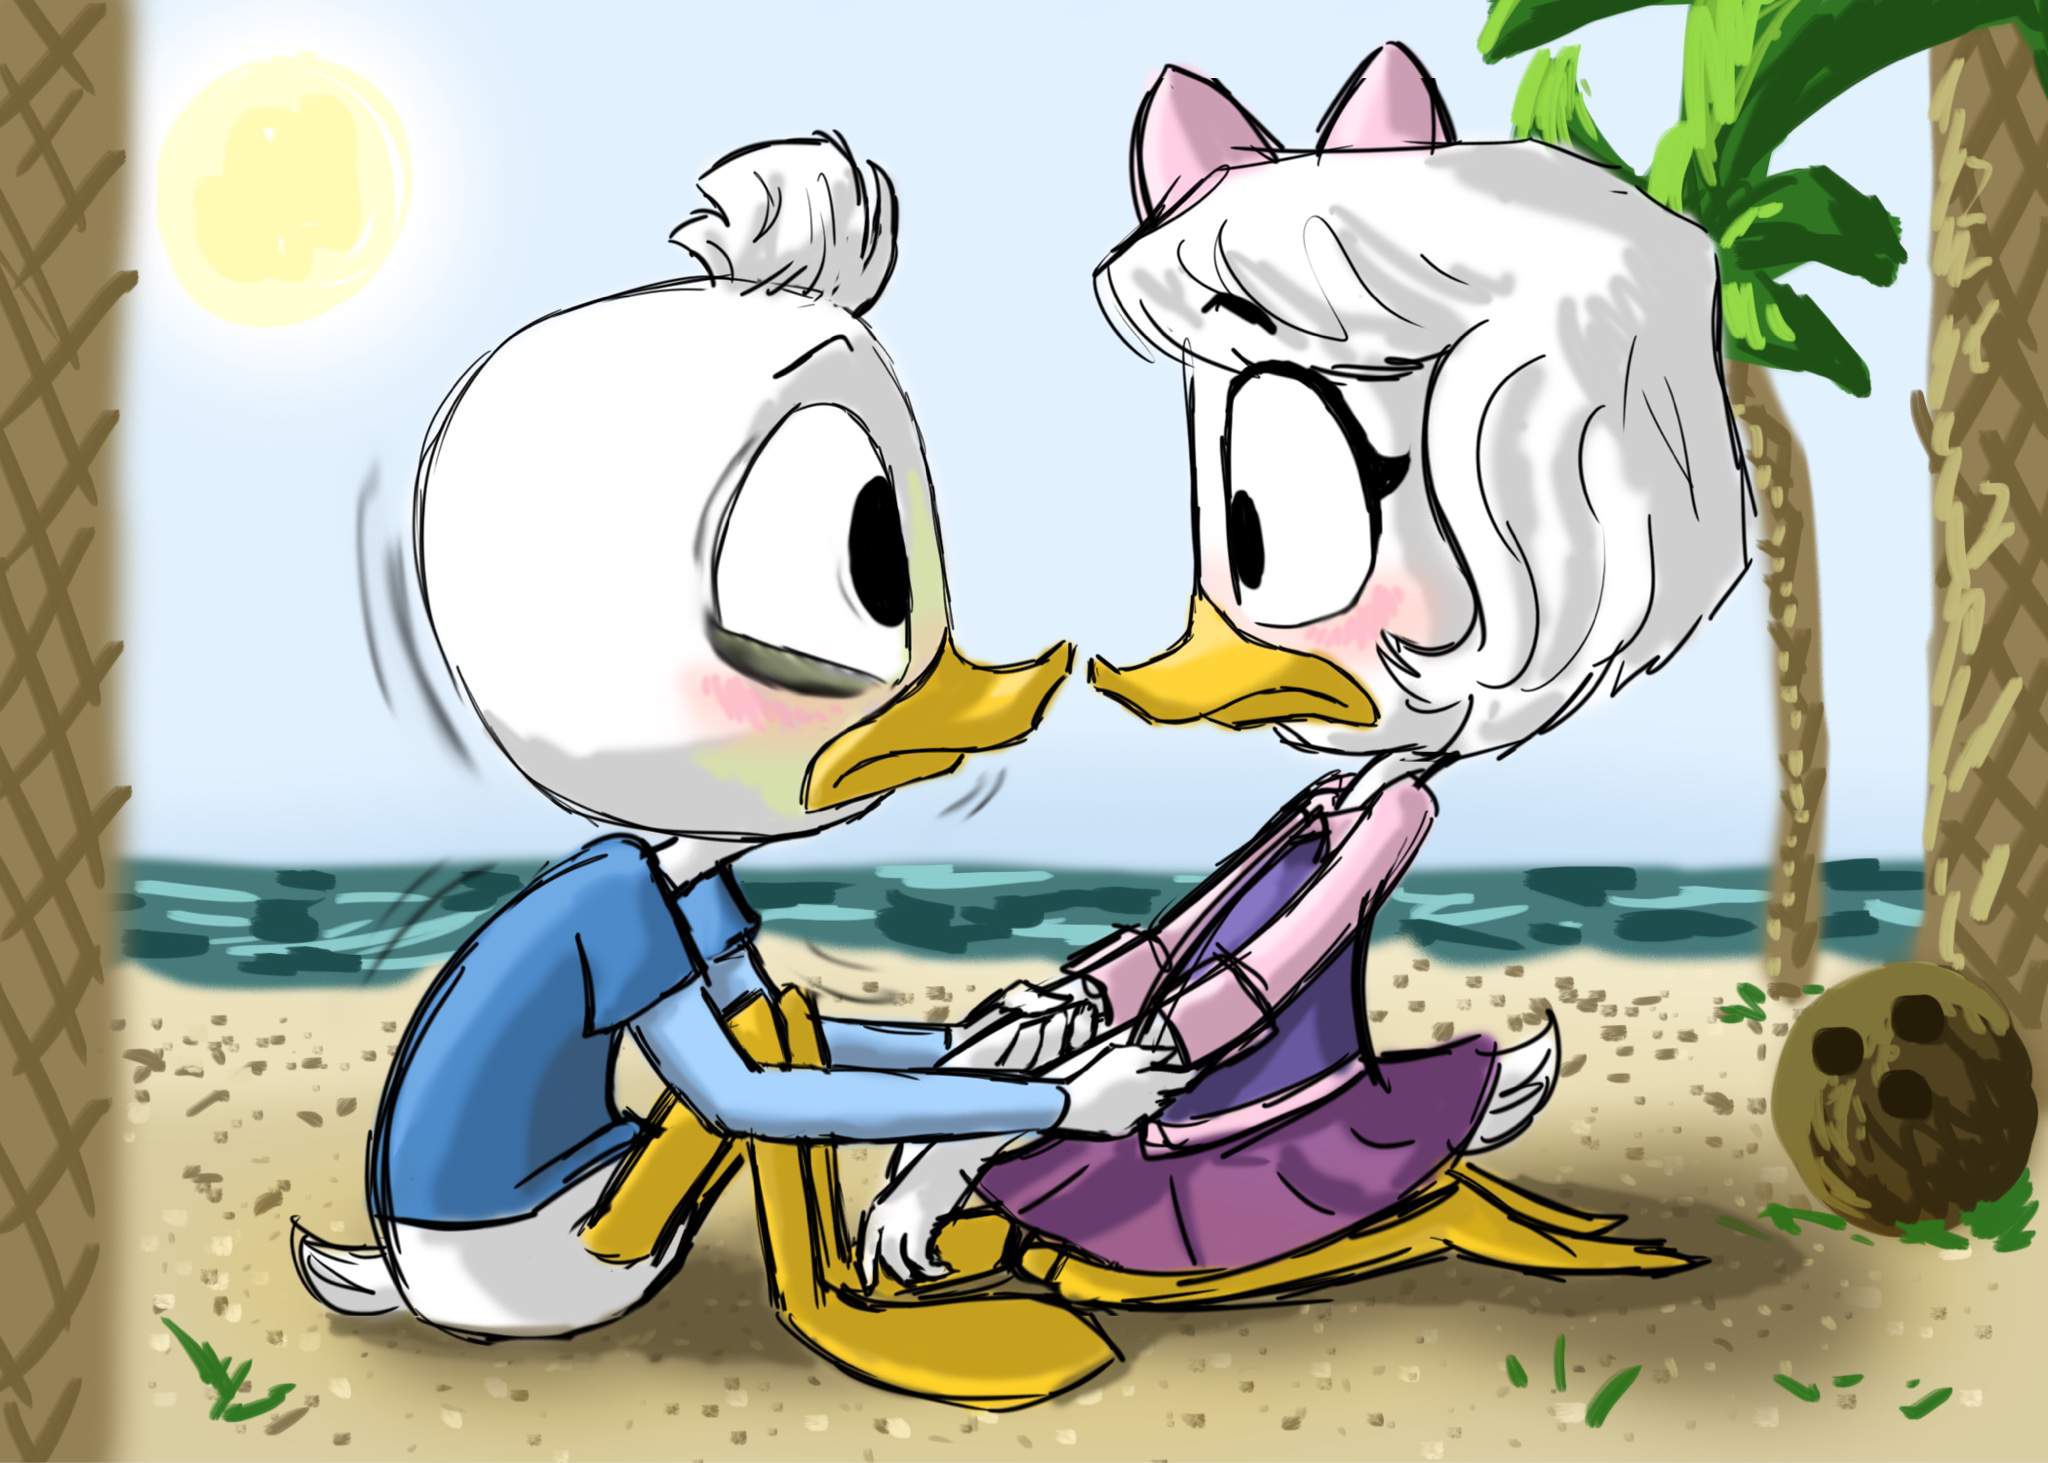 Island of Imaginthought fanfiction fanart Duck-Tales Amino.